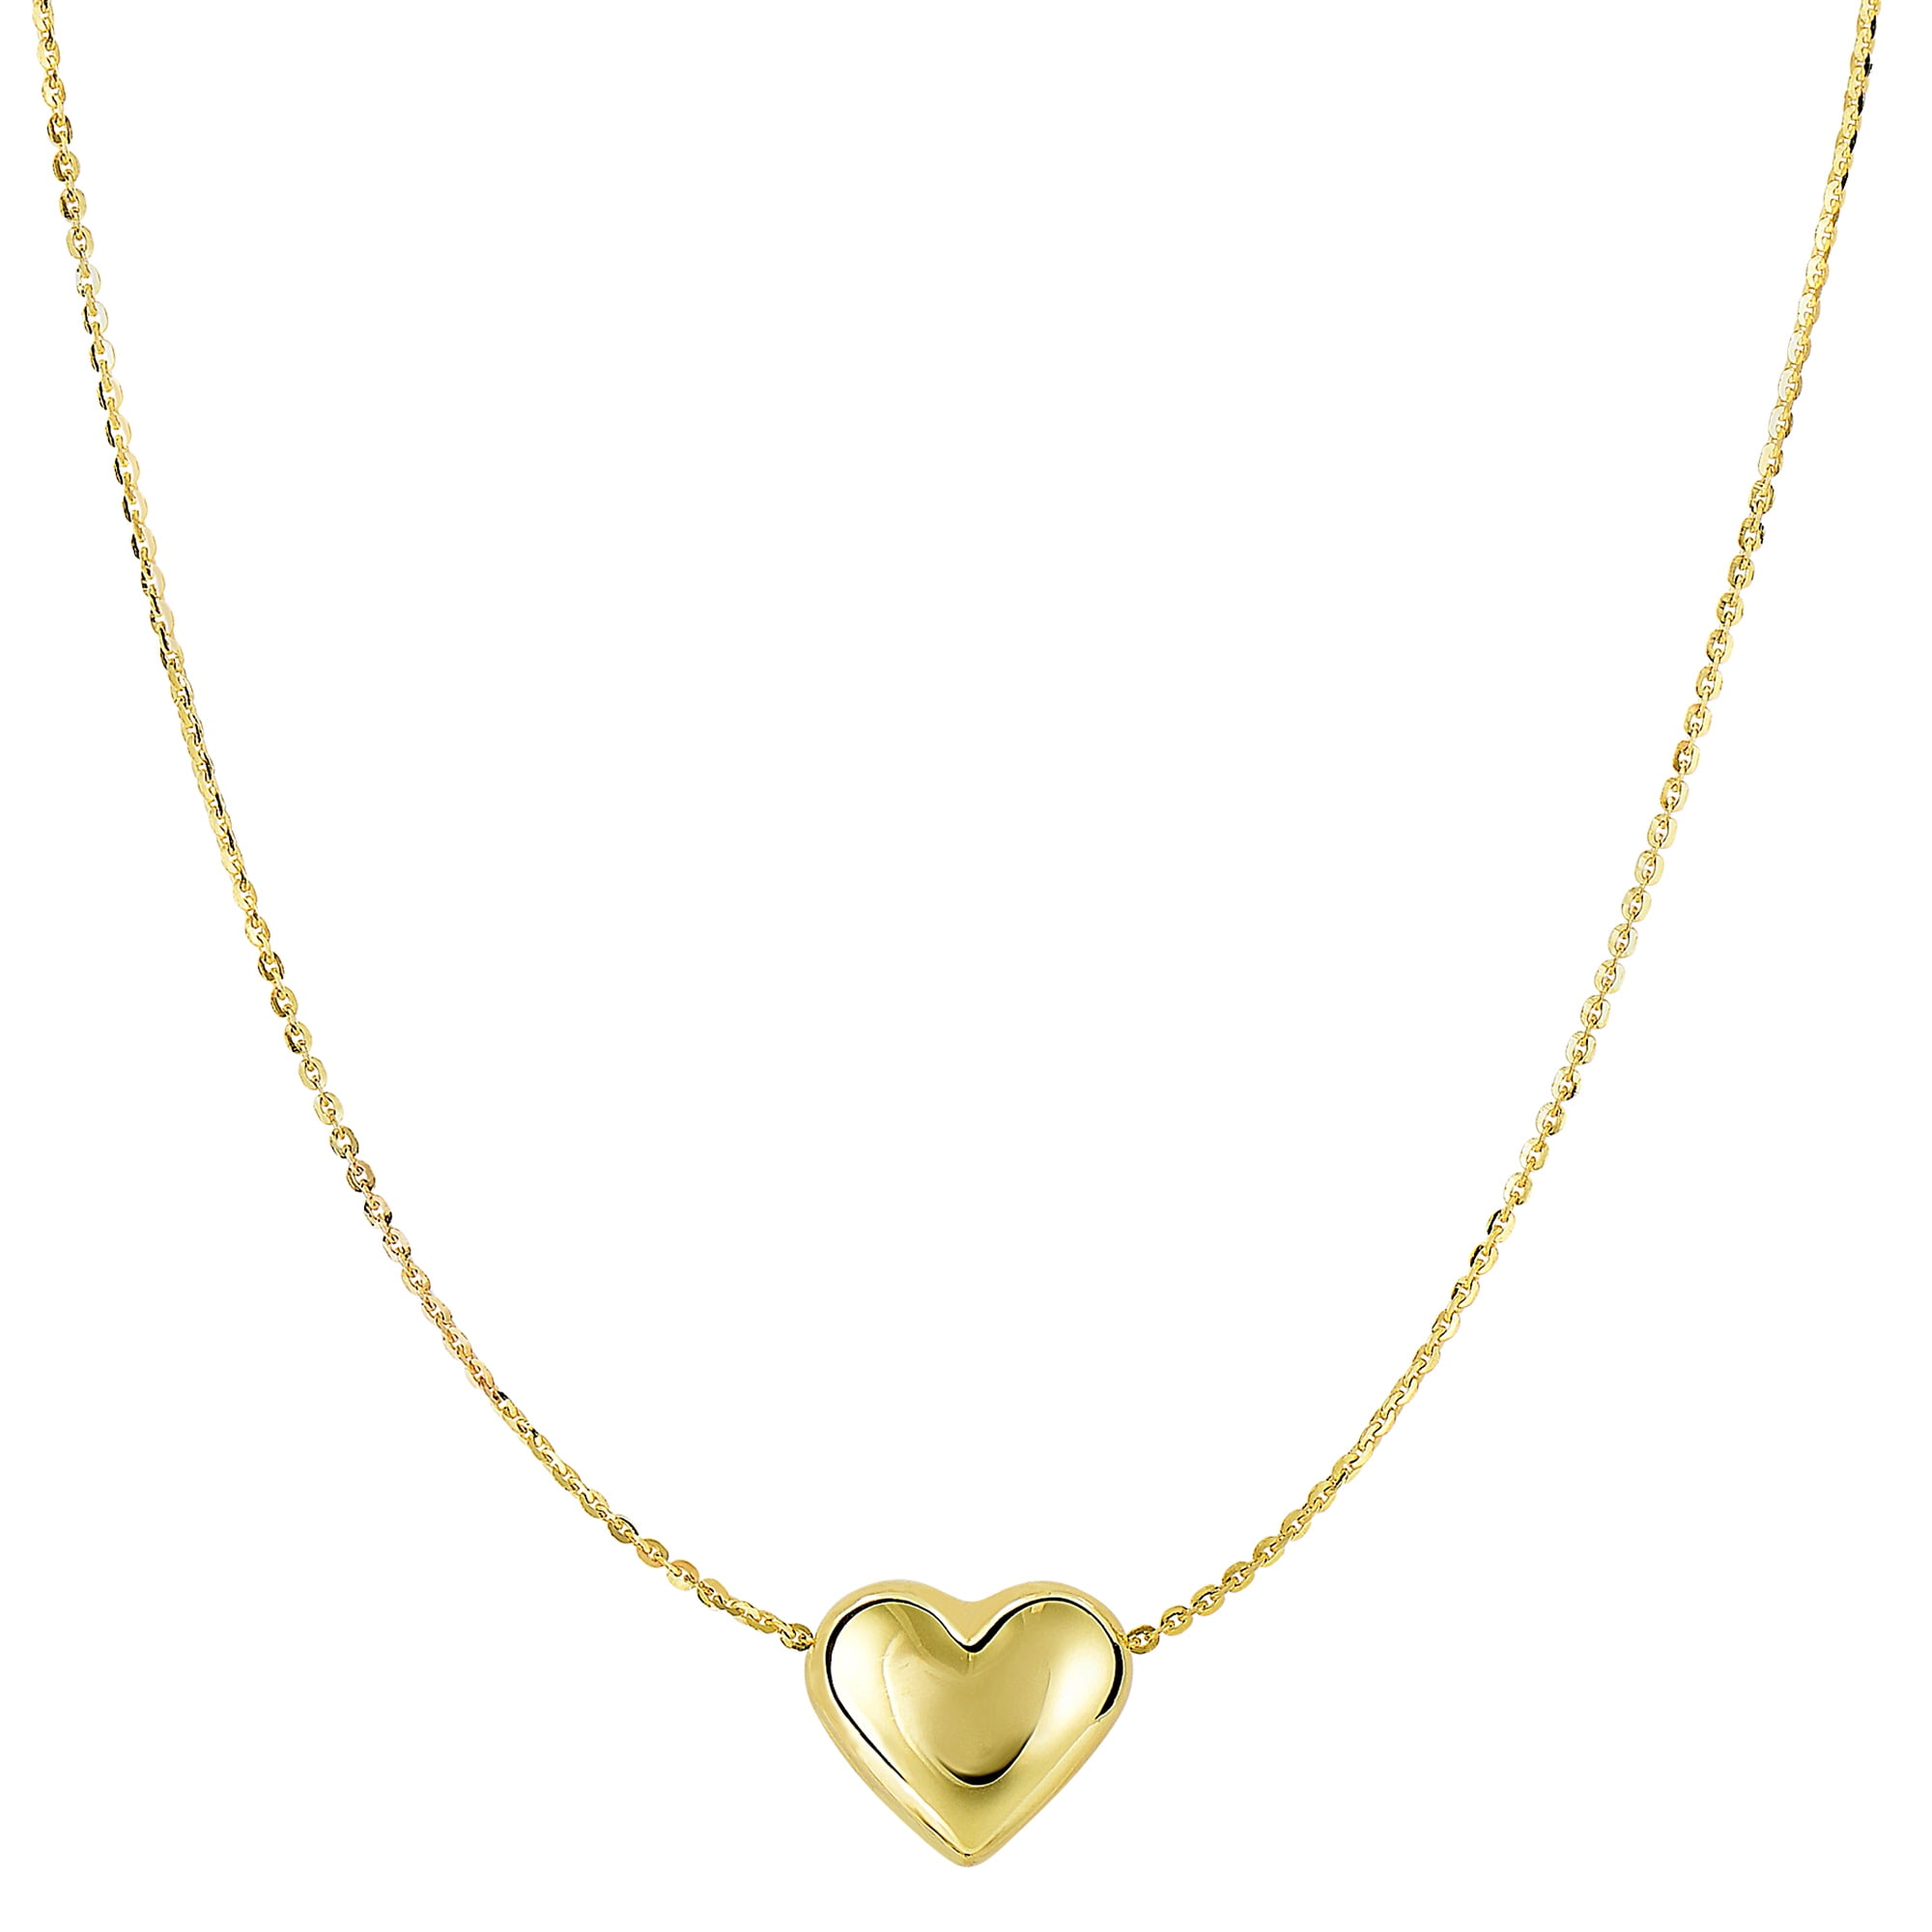 10K Yellow Gold Puffed Heart Pendant Necklace, 18